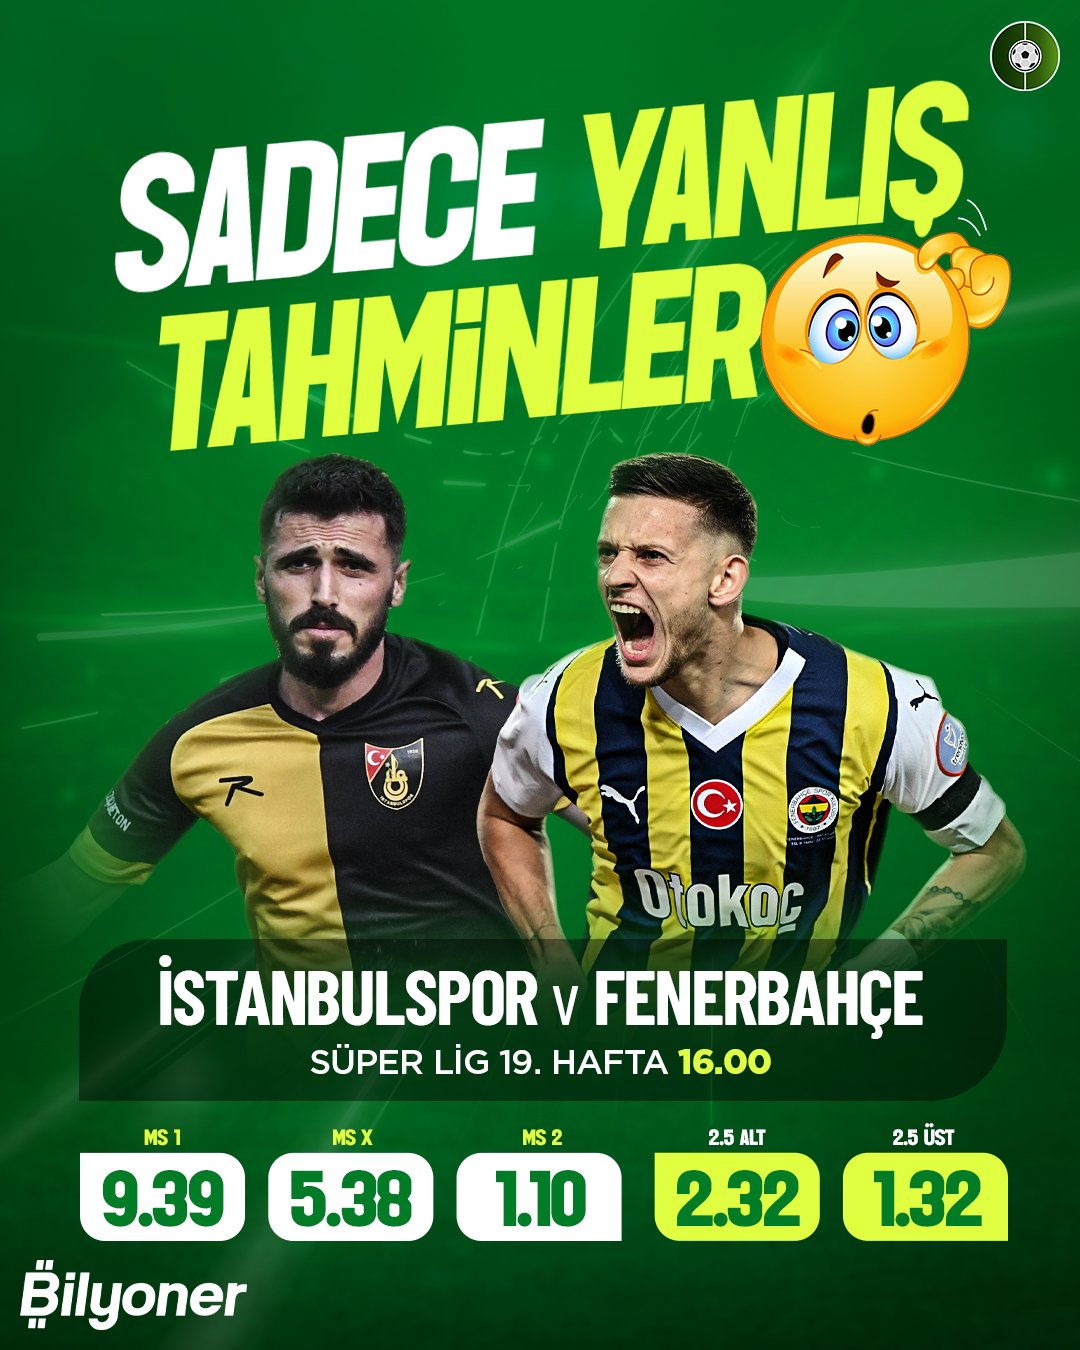 The Intense Rivalry Between Fenerbahçe and Galatasaray